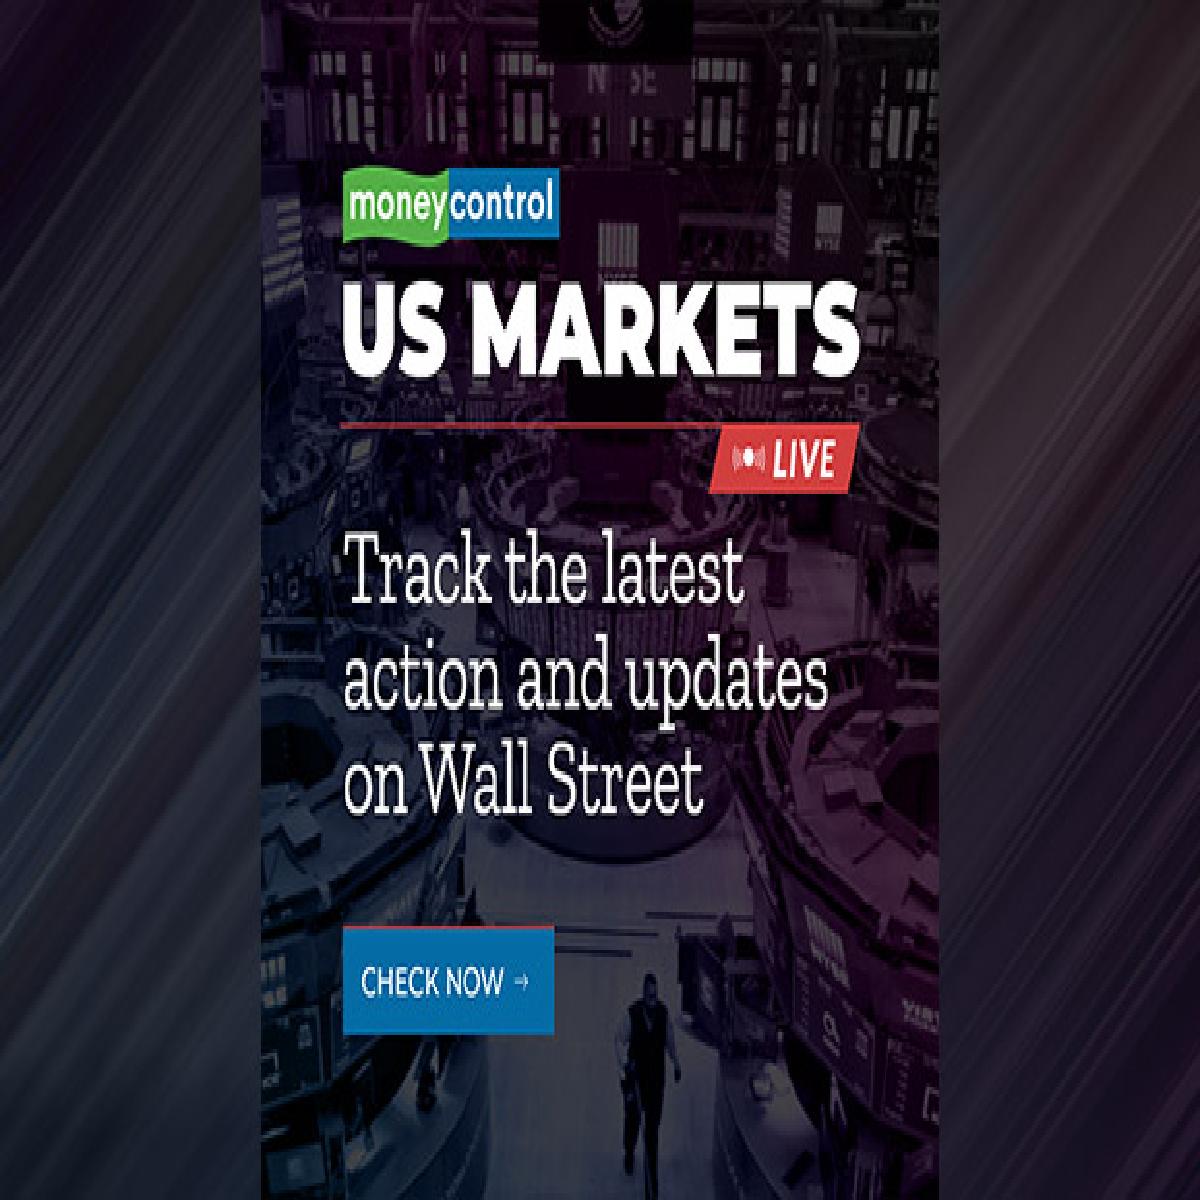 Moneycontrol Brings US Stocks Action for Indian Investors with Its Latest Offering - US Markets